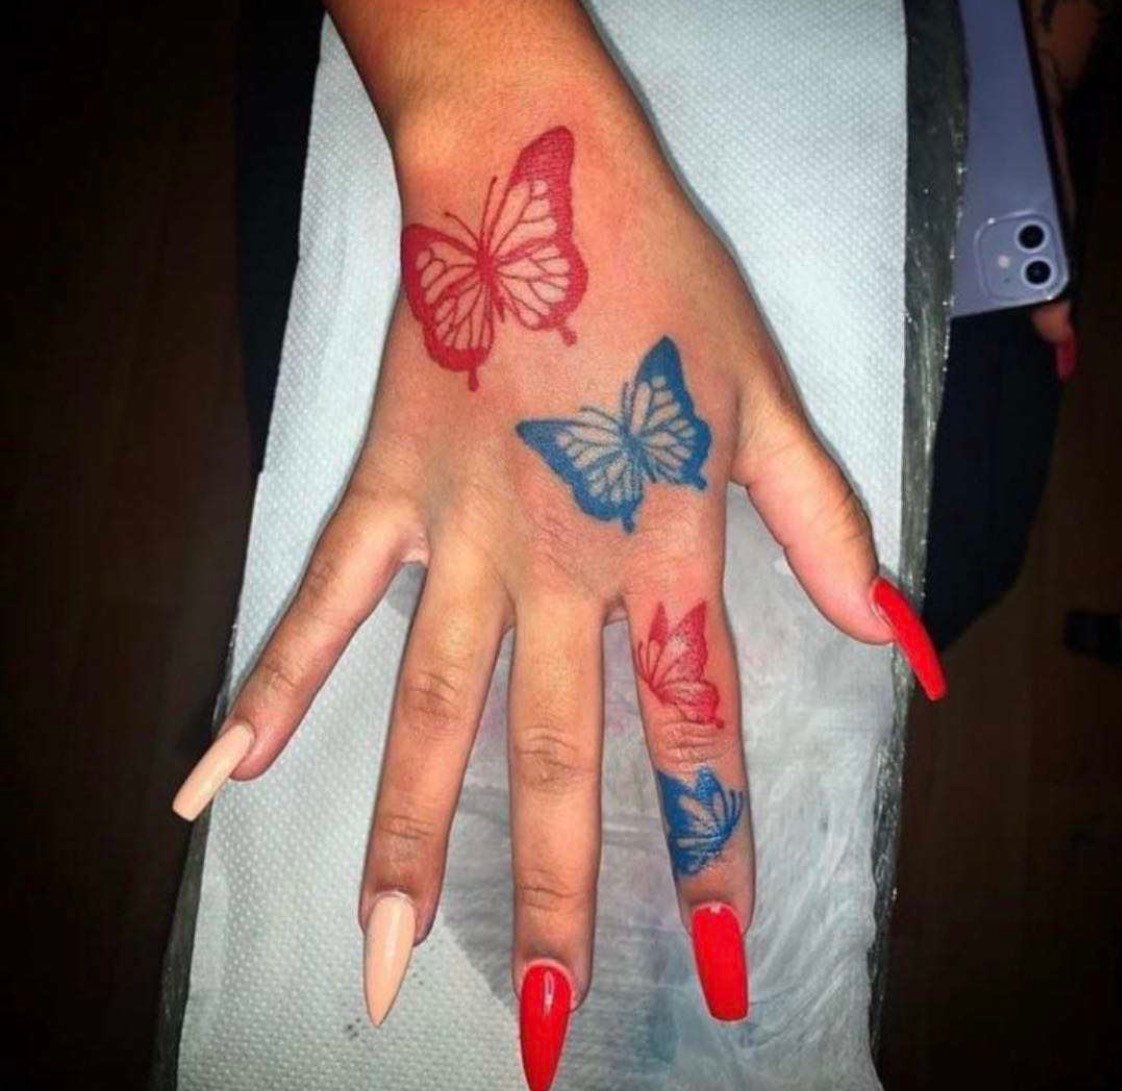 The Parlour tattoos  Red cherry blossom and butterfly hand tattoo by Lucy   Facebook